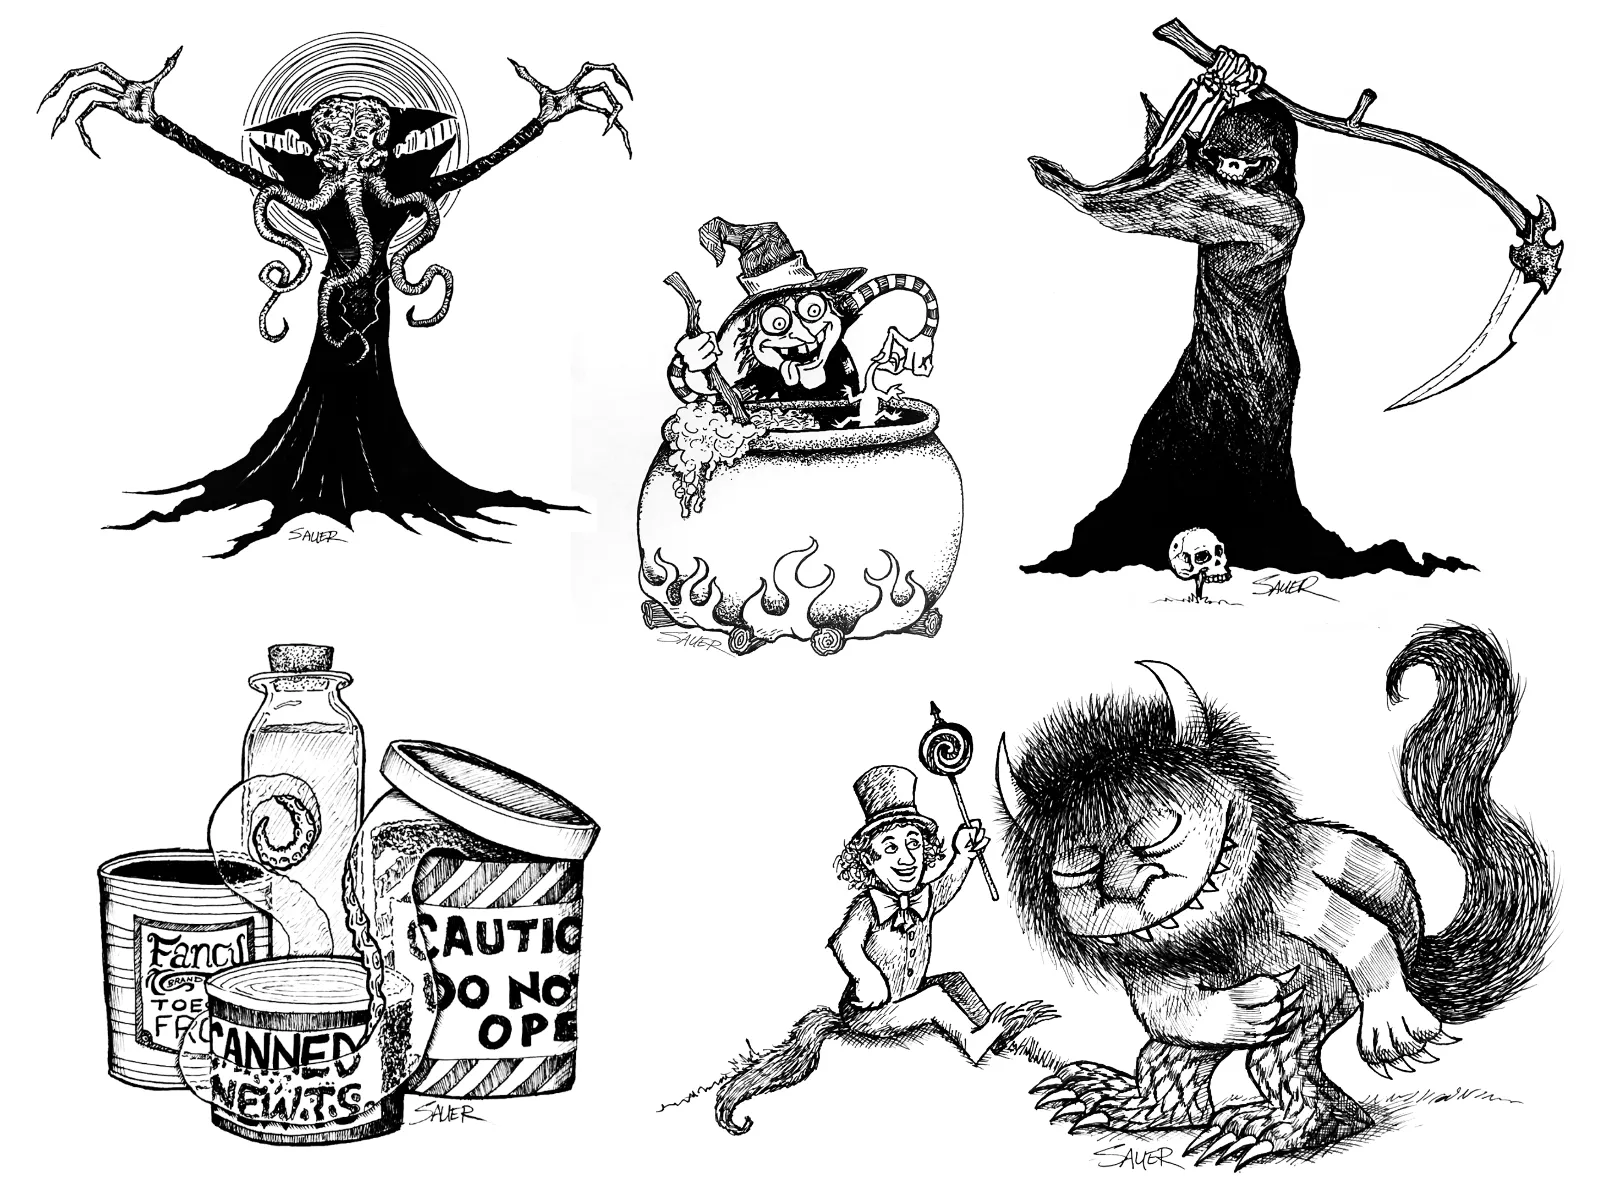 Black and white illustrations of a Mind Flayer, a witch, Death playing golf, a transparent tentacle, and a Willy Wonka Where the Wild Things Are mash-up